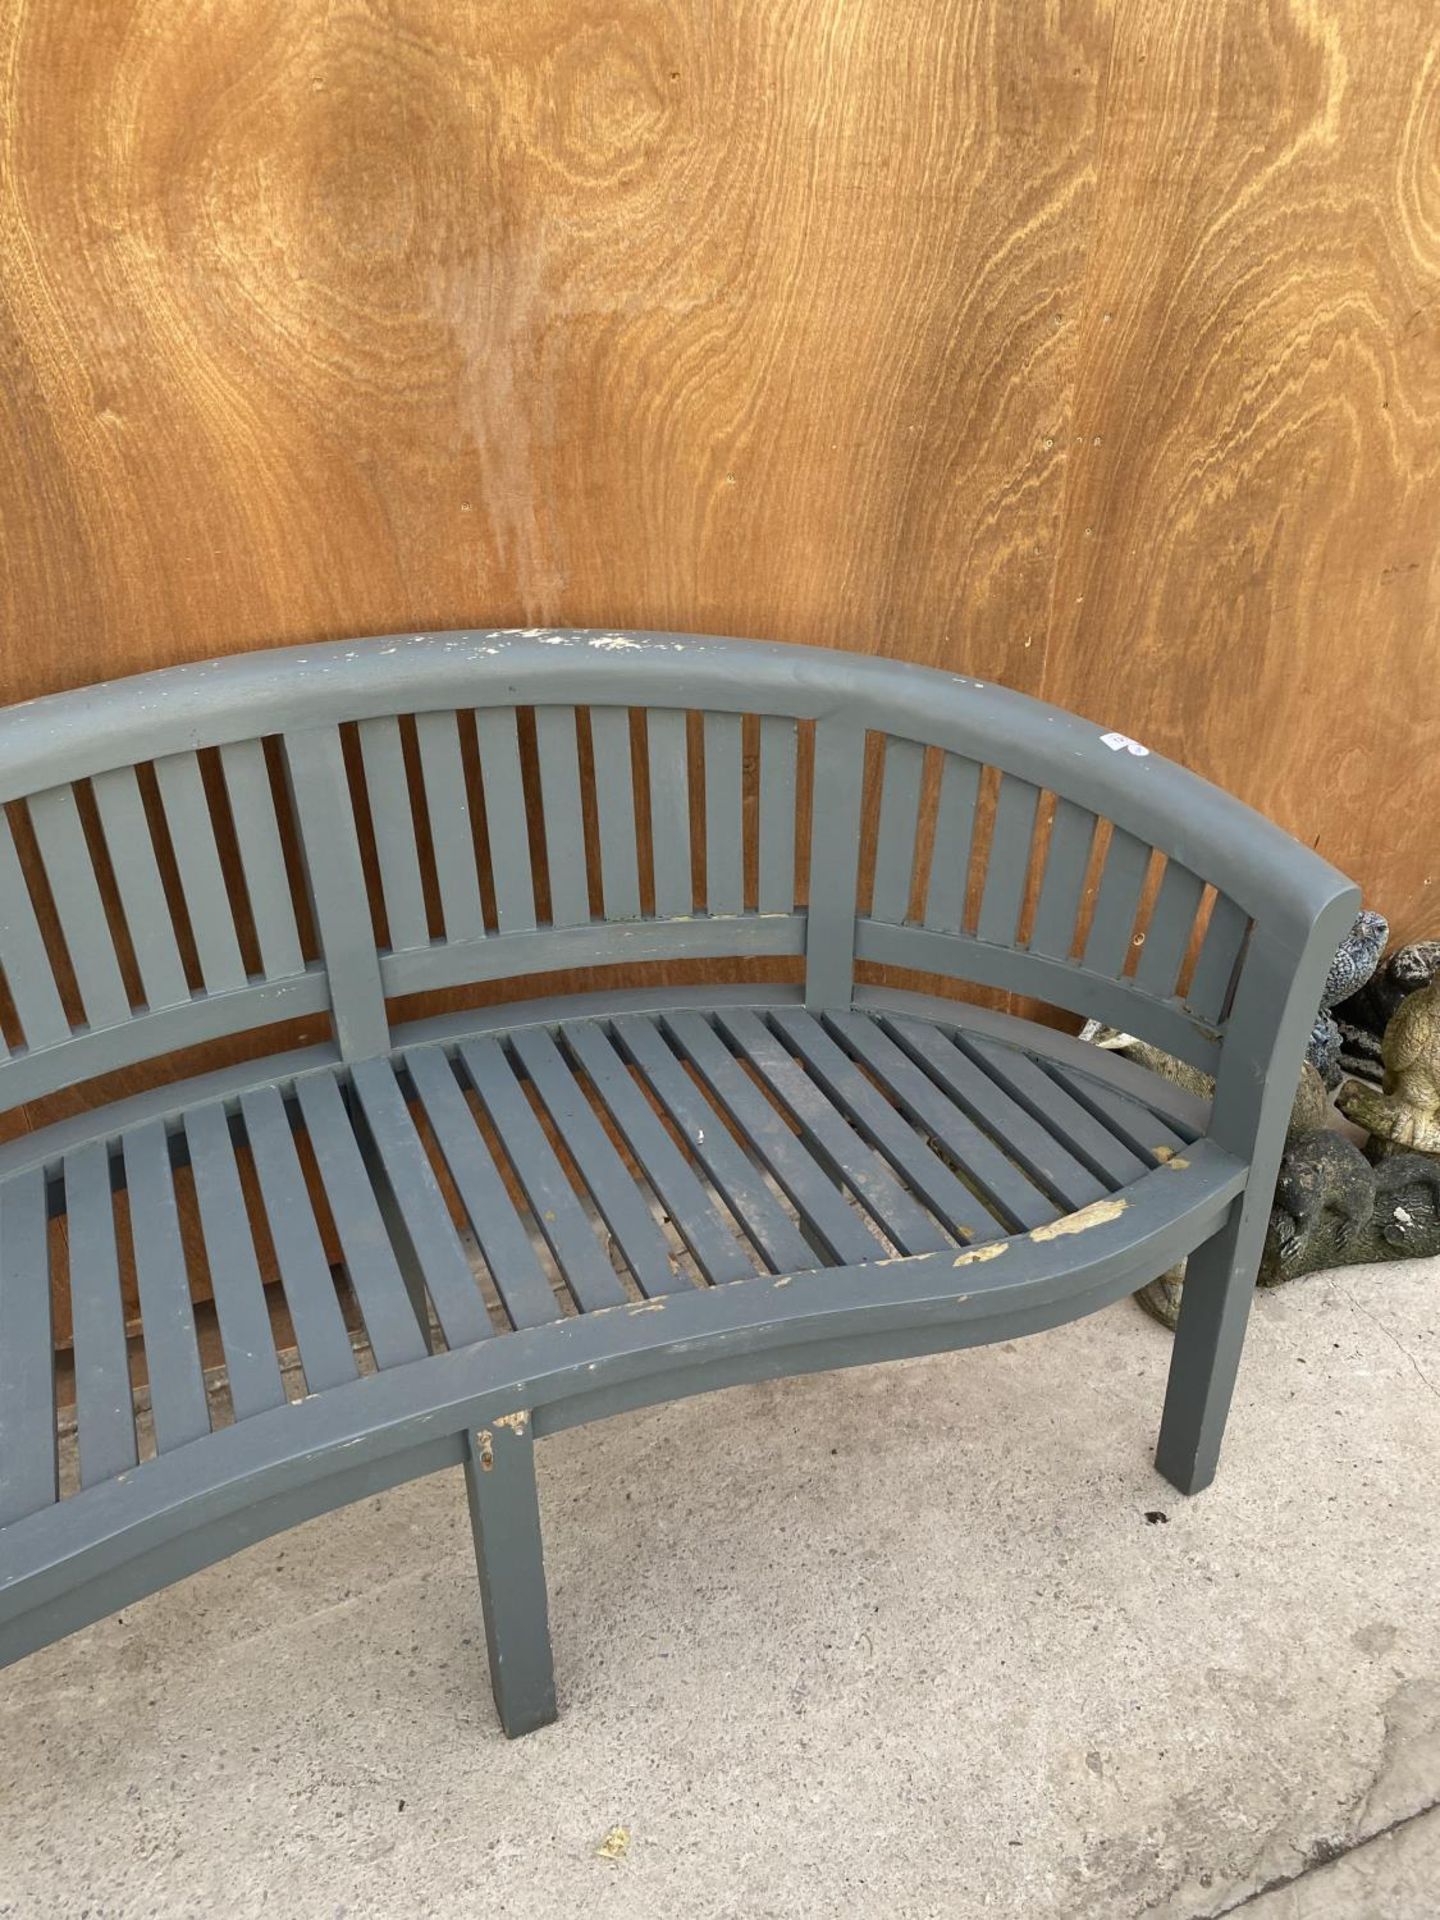 A WOODEN SLATTED CURVED GARDEN BENCH - Image 3 of 4